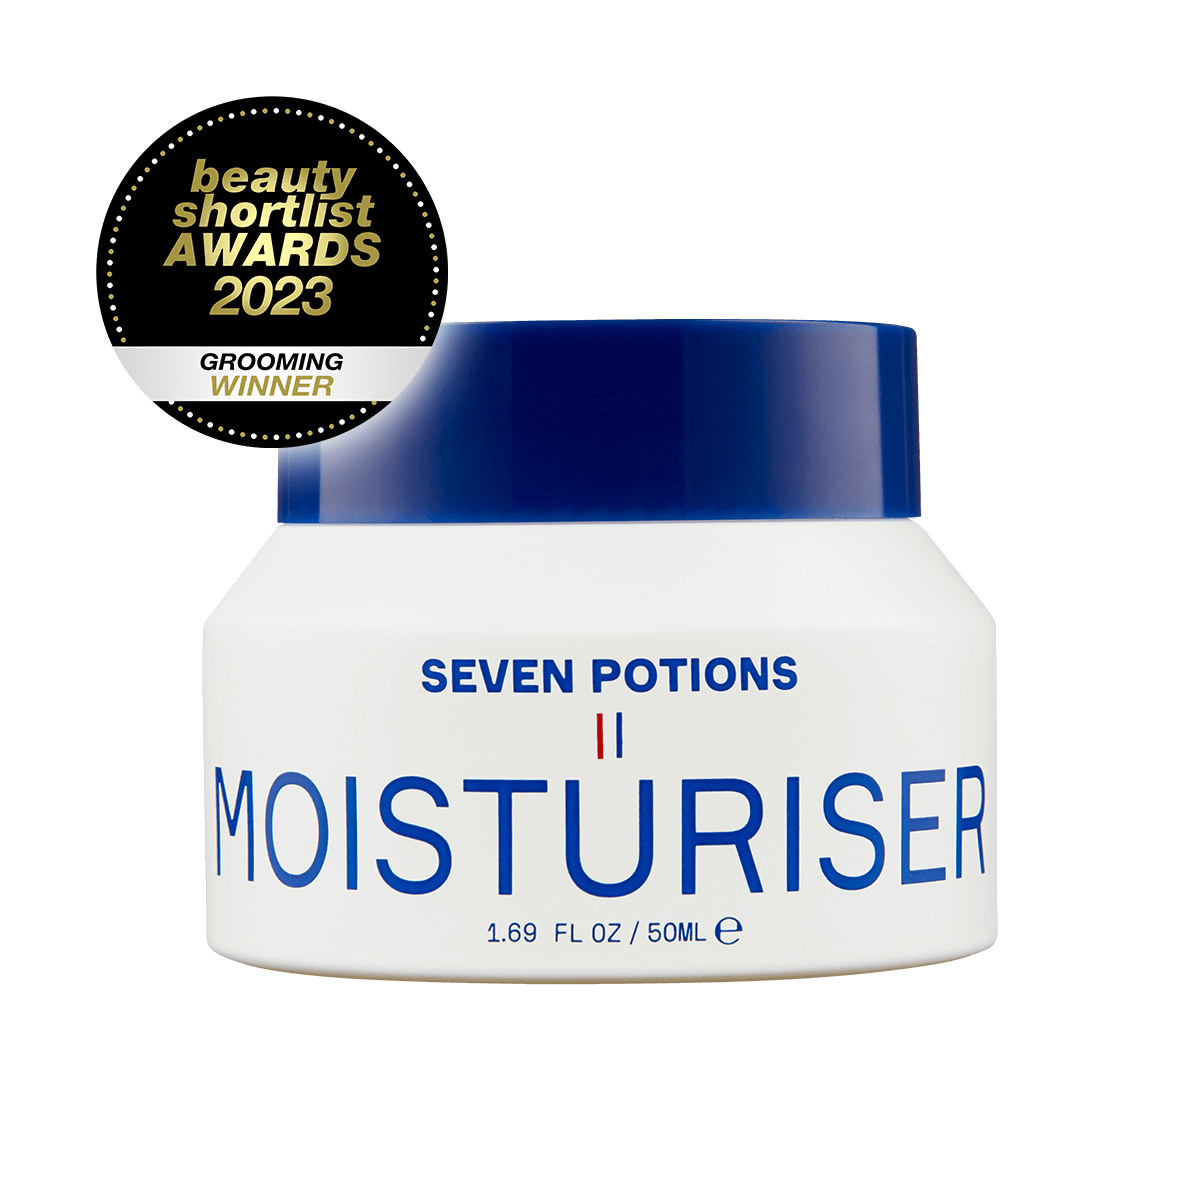 Seven Potions Anti Ageing Moisturiser for Face and all skin types